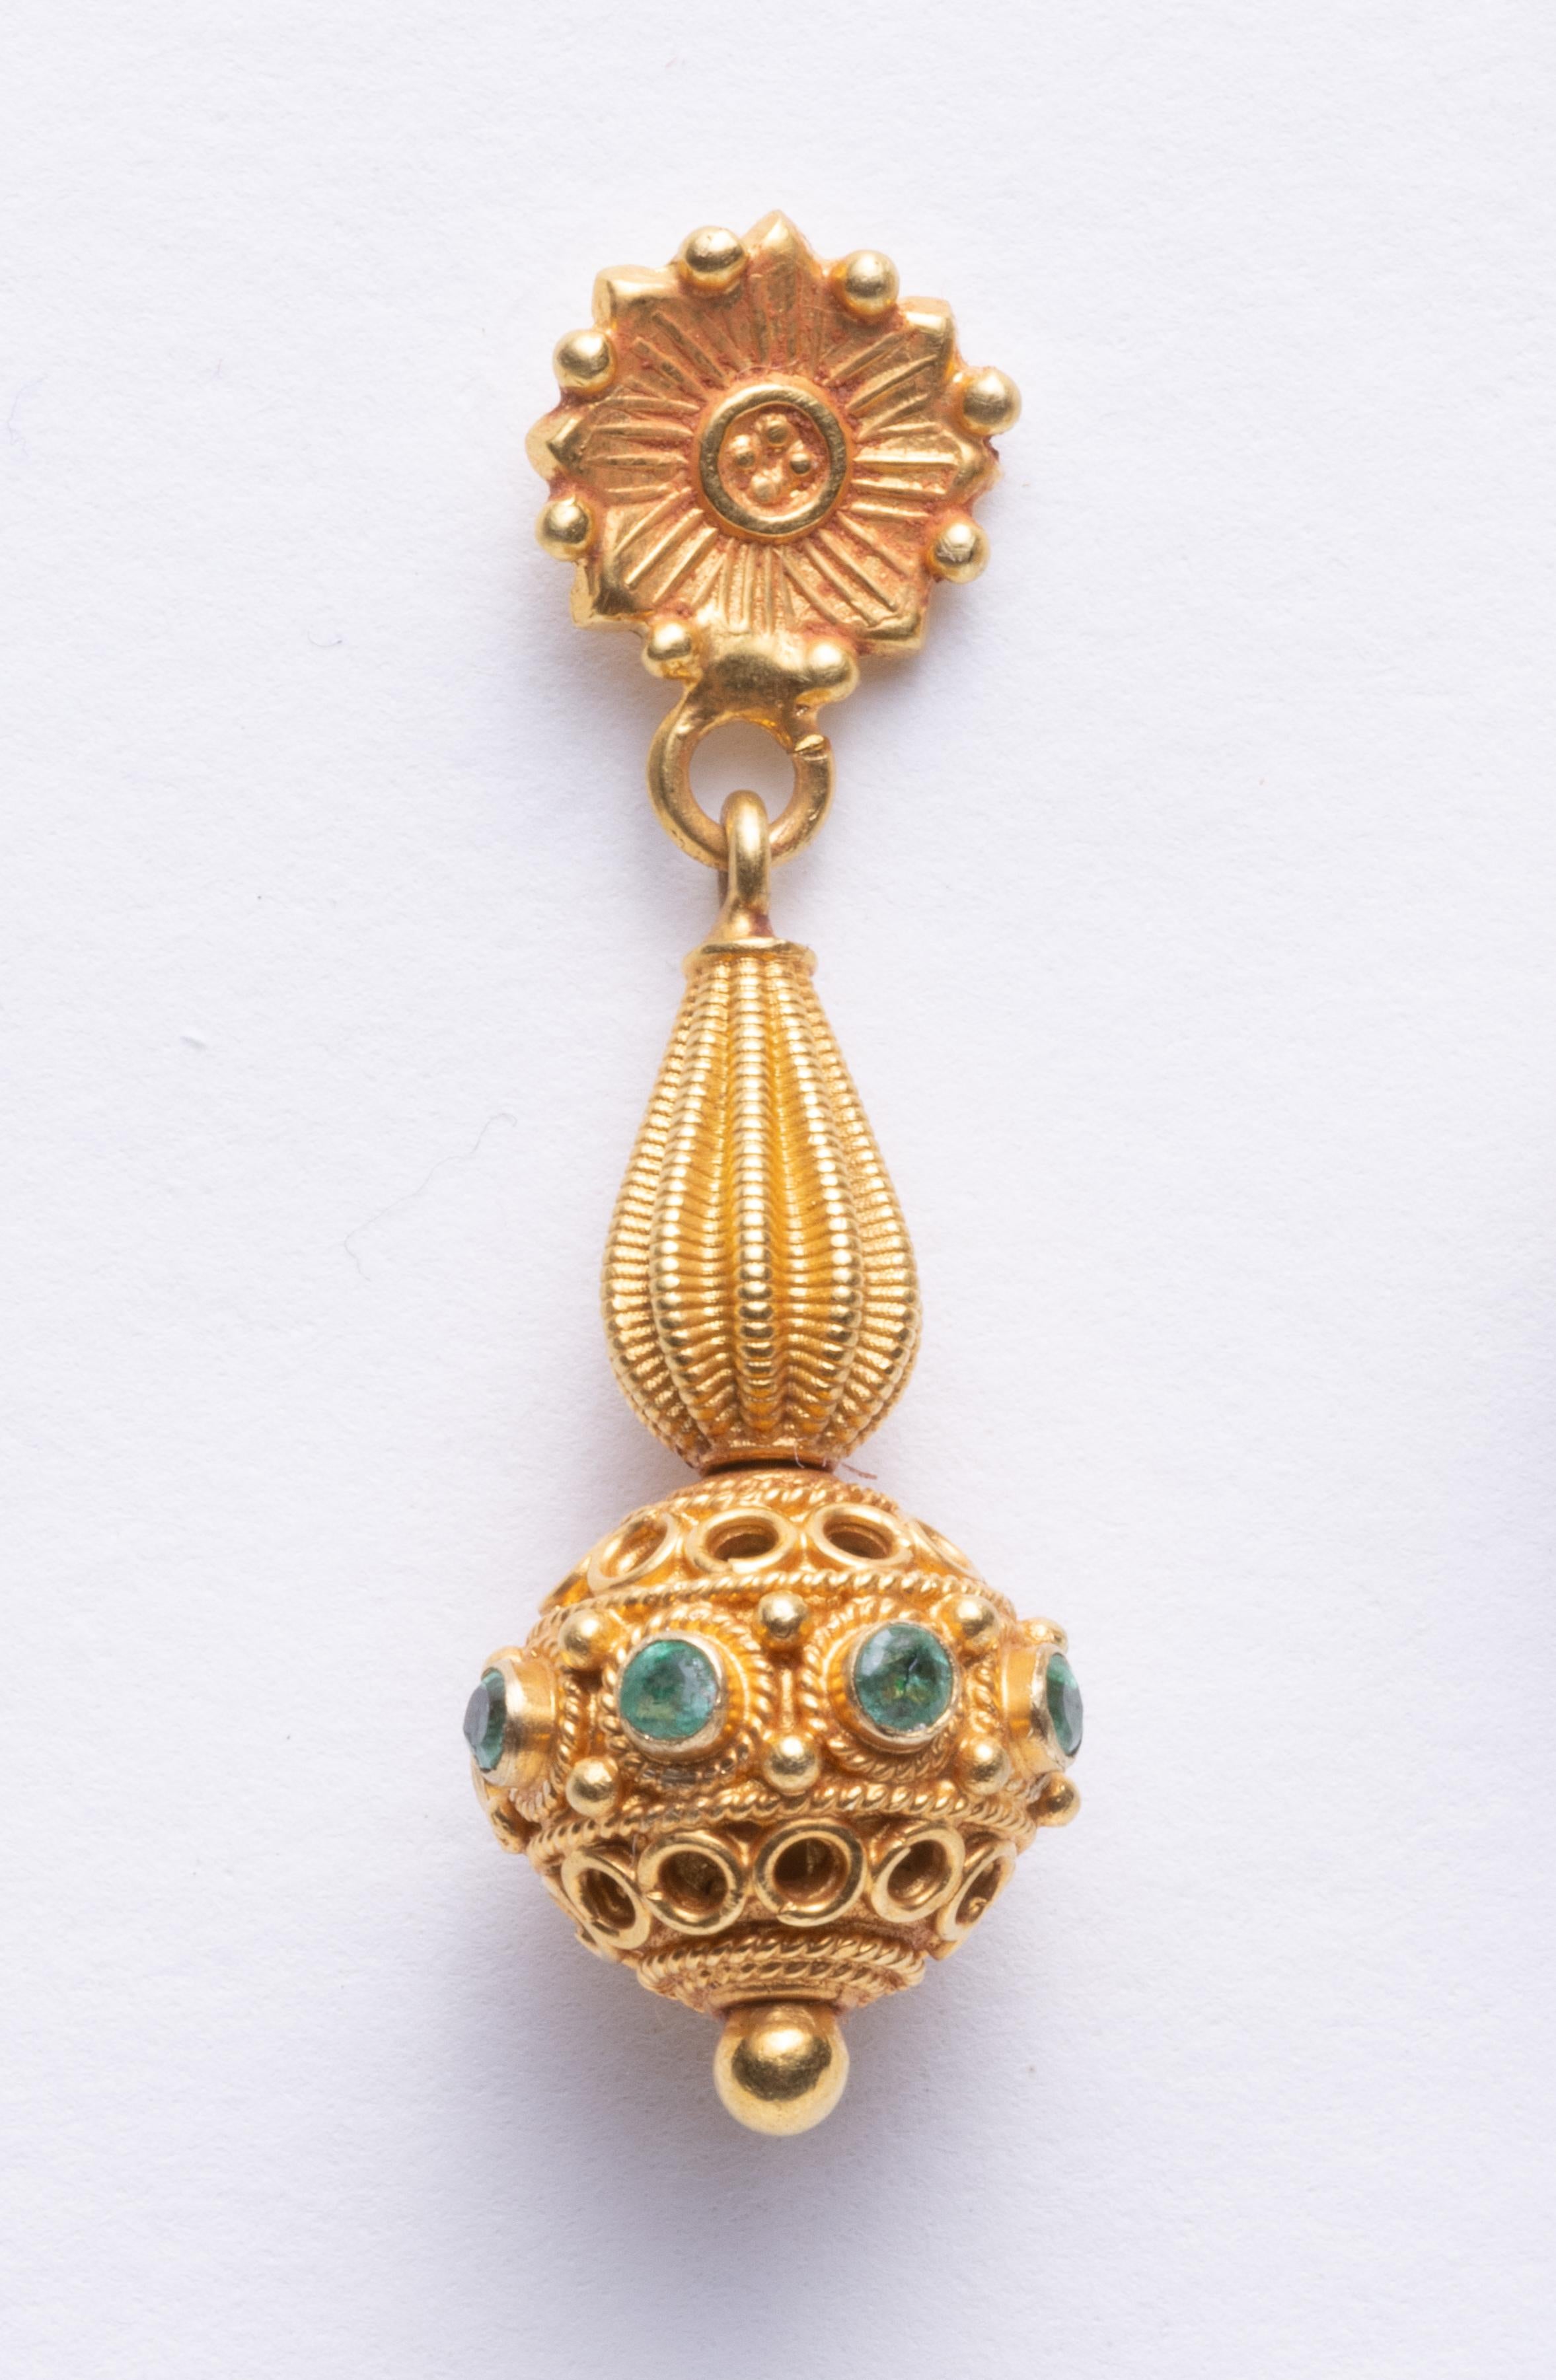 Pair of finely tooled 22K gold dangle earrings with faceted round emeralds around the ball portion.  A floral motif post with detailed workmanship.  Late 1990's.